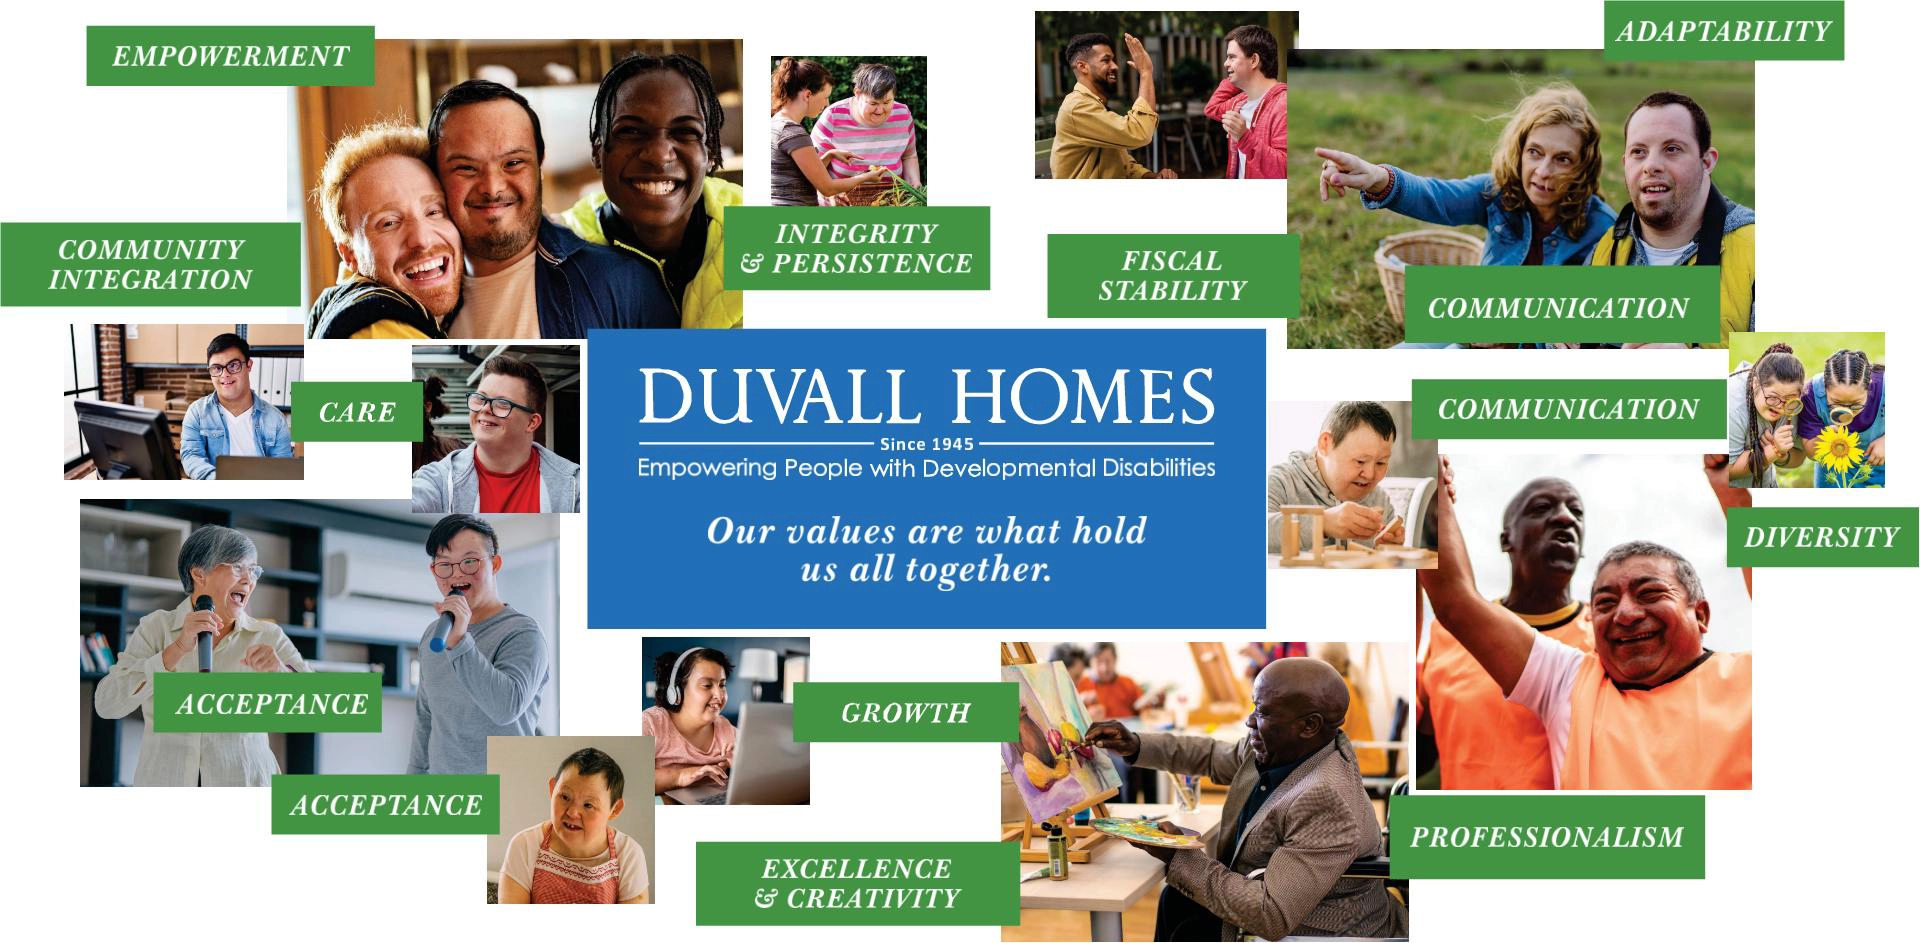 Duvall Homes, empowering people with developmental disabilities since 1945